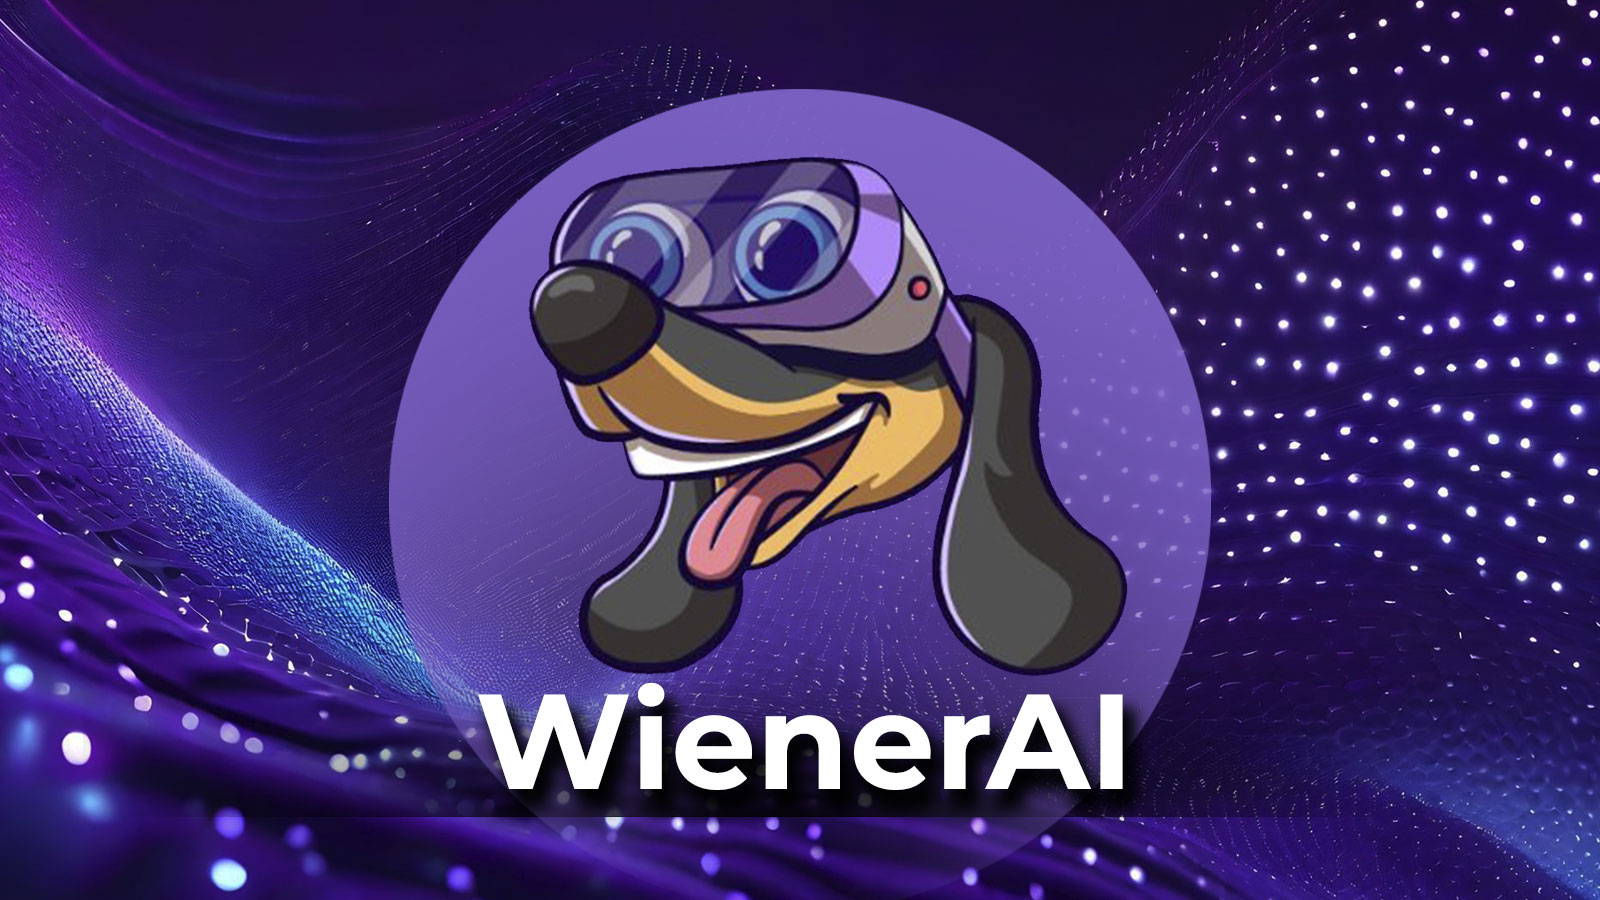 WienerAI: The Viral New Meme Coin Reignites AI Crypto Frenzy With Sausage Army